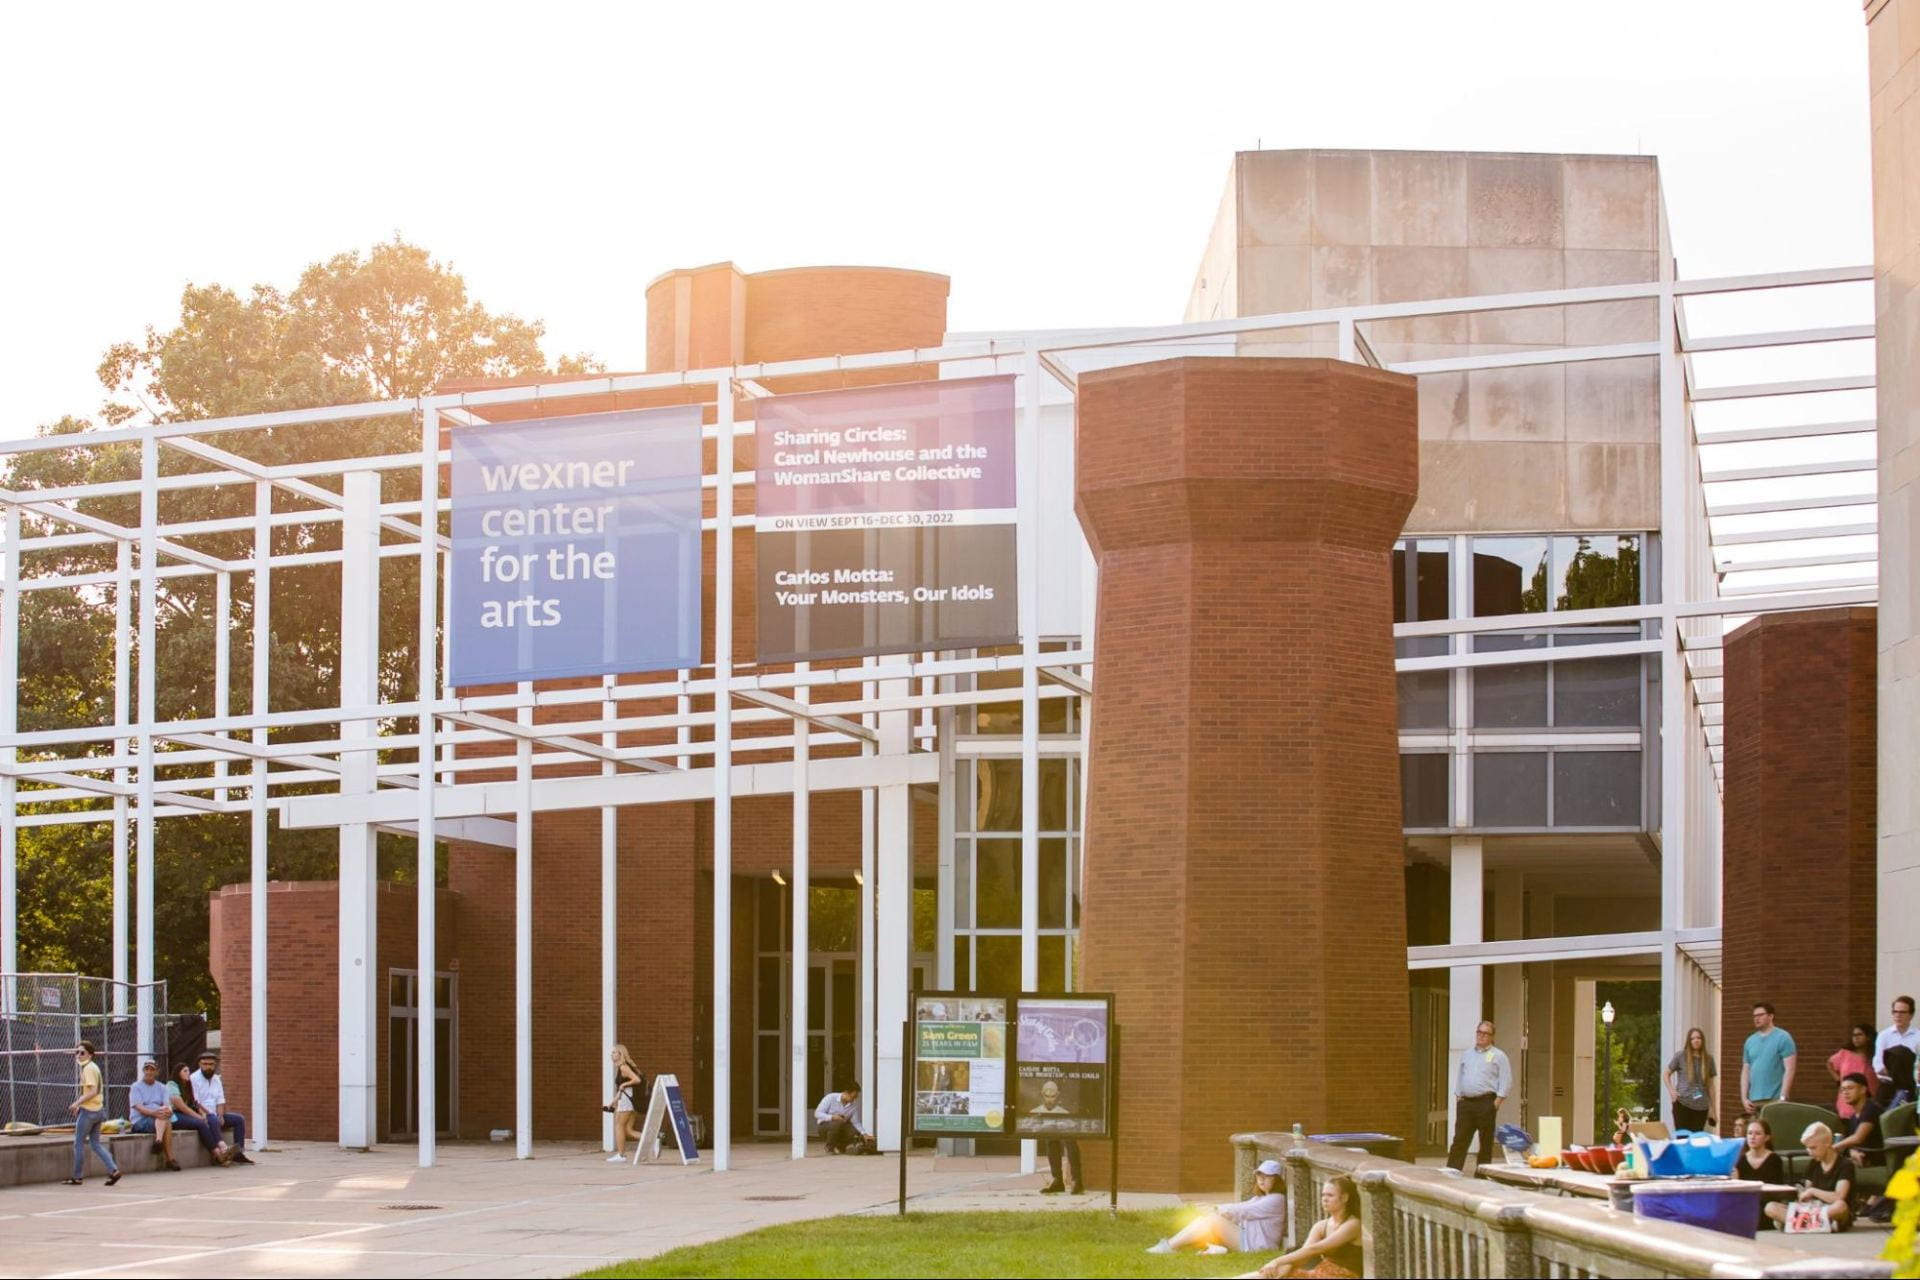 The Wexner Center for the Arts is presenting its annual open house Thursday, Sept. 14. Credit: Kathryn D Studios